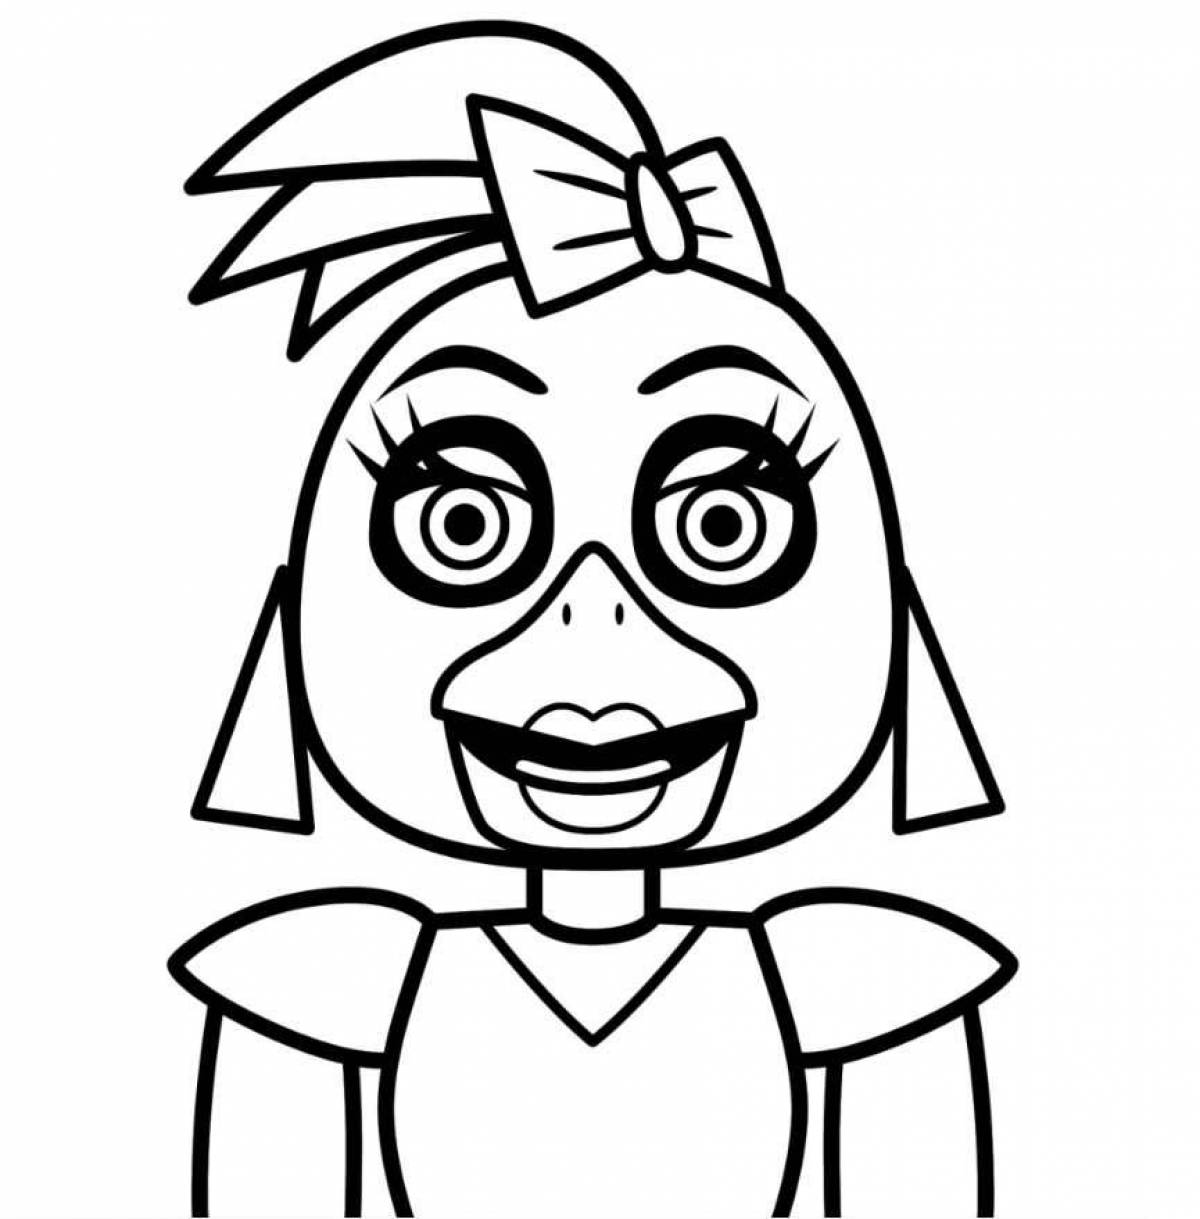 Chica's colorful coloring page